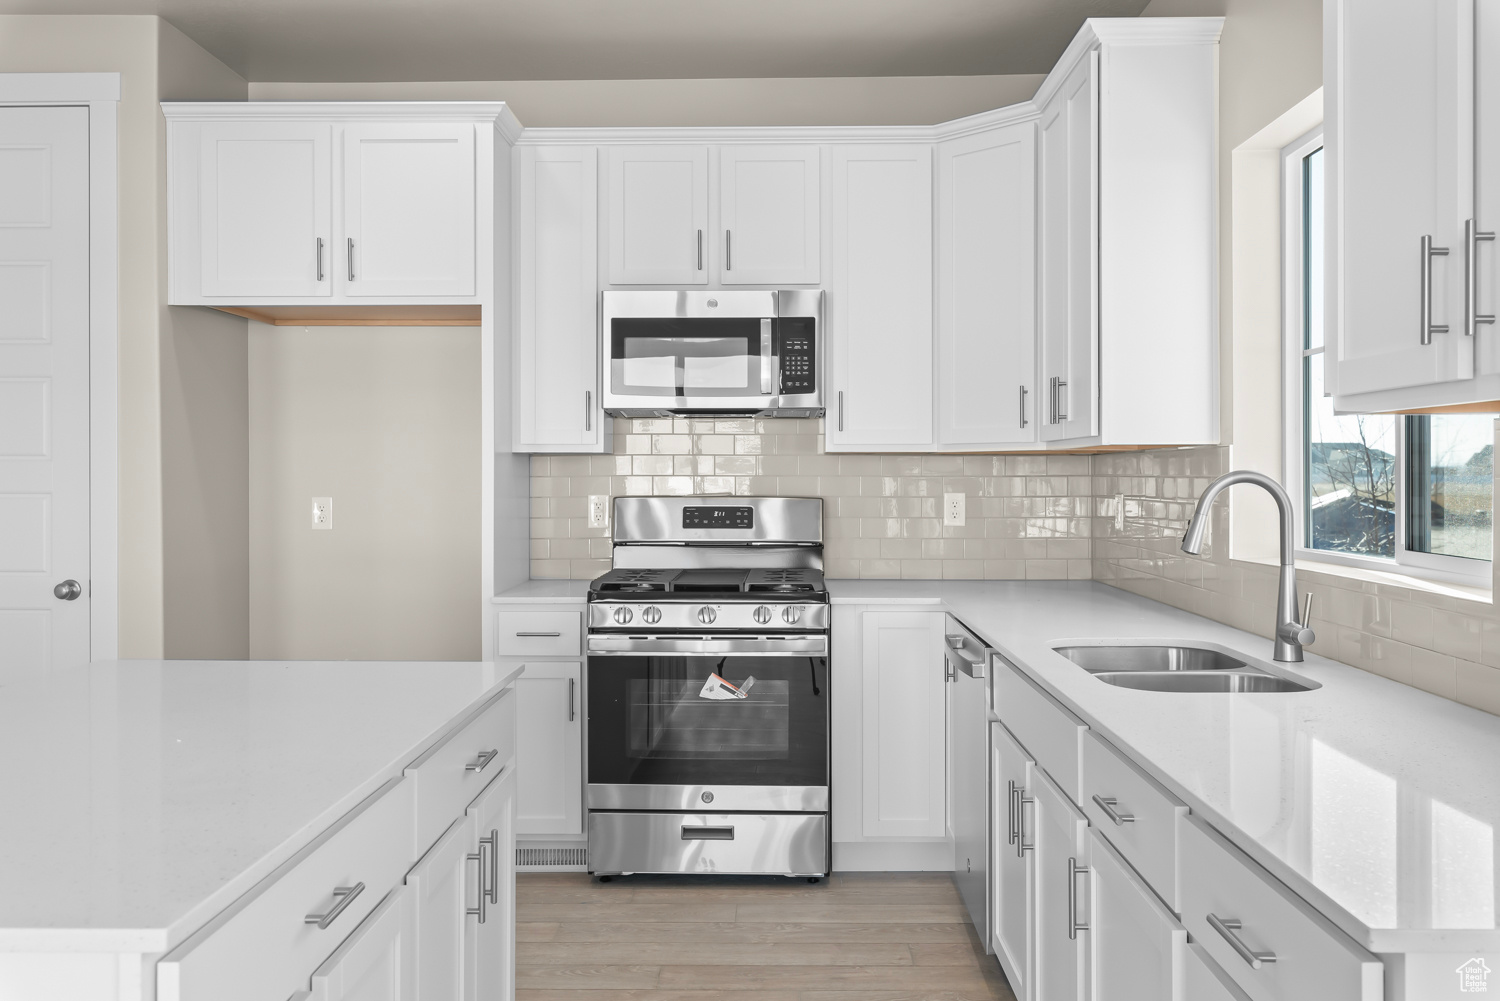 Kitchen with white cabinets, sink, light wood-type flooring, and appliances with stainless steel finishes